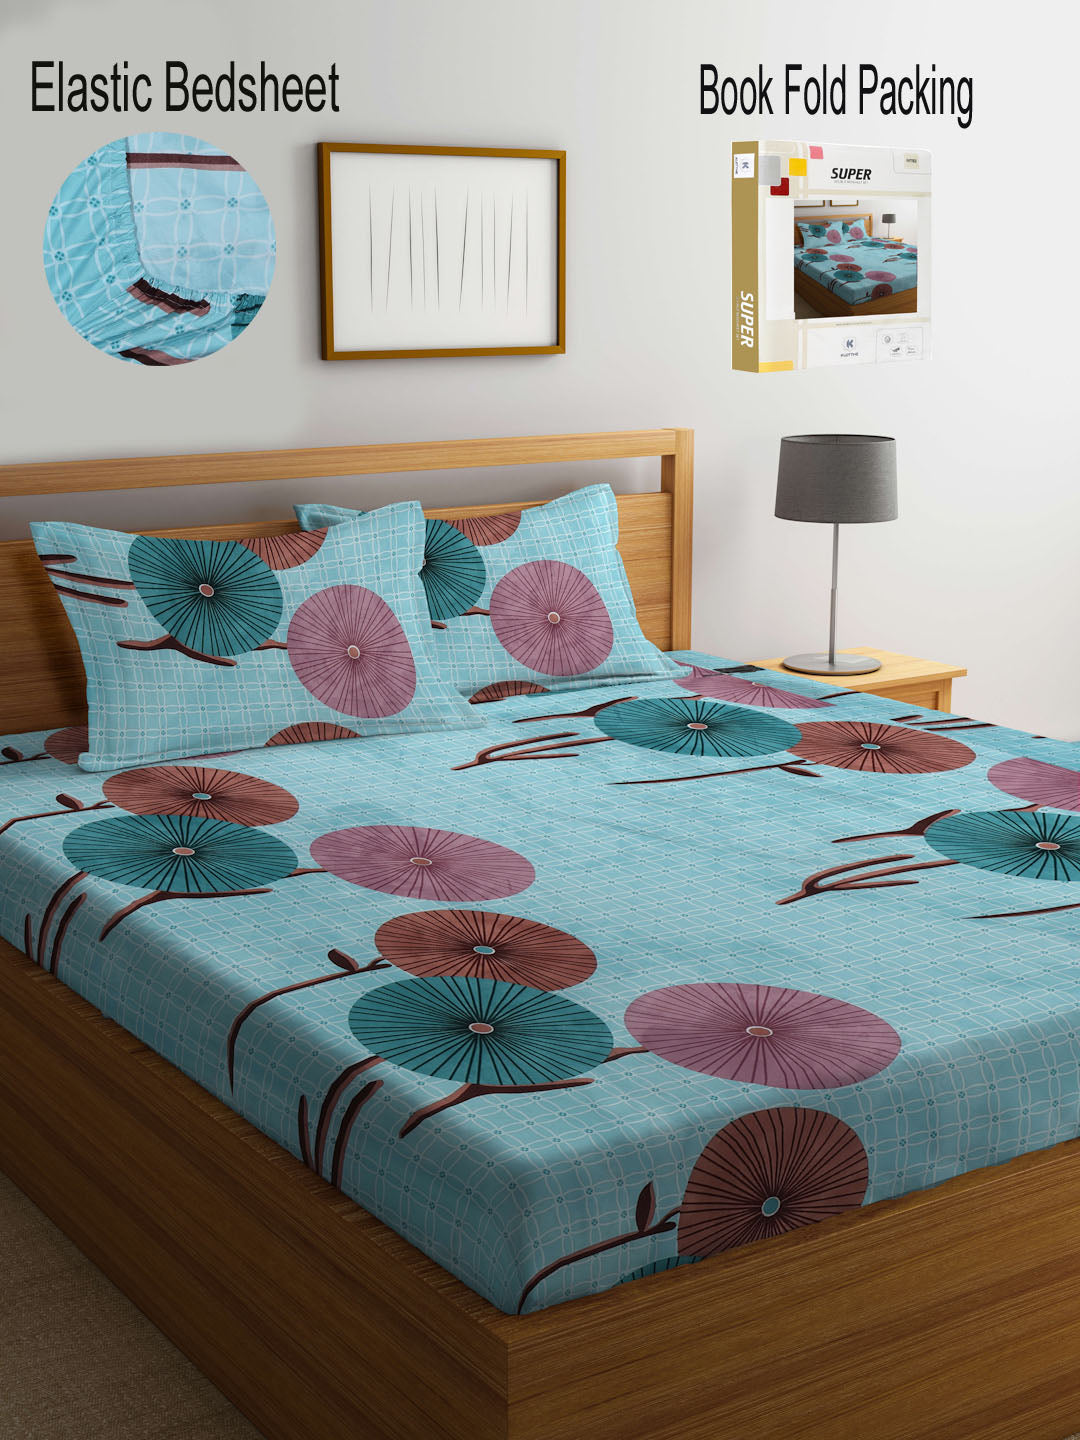 Klotthe Multi Floral 300 TC Cotton Blend Fitted Double Bedsheet with 2 Pillow Covers in Book Fold Packing